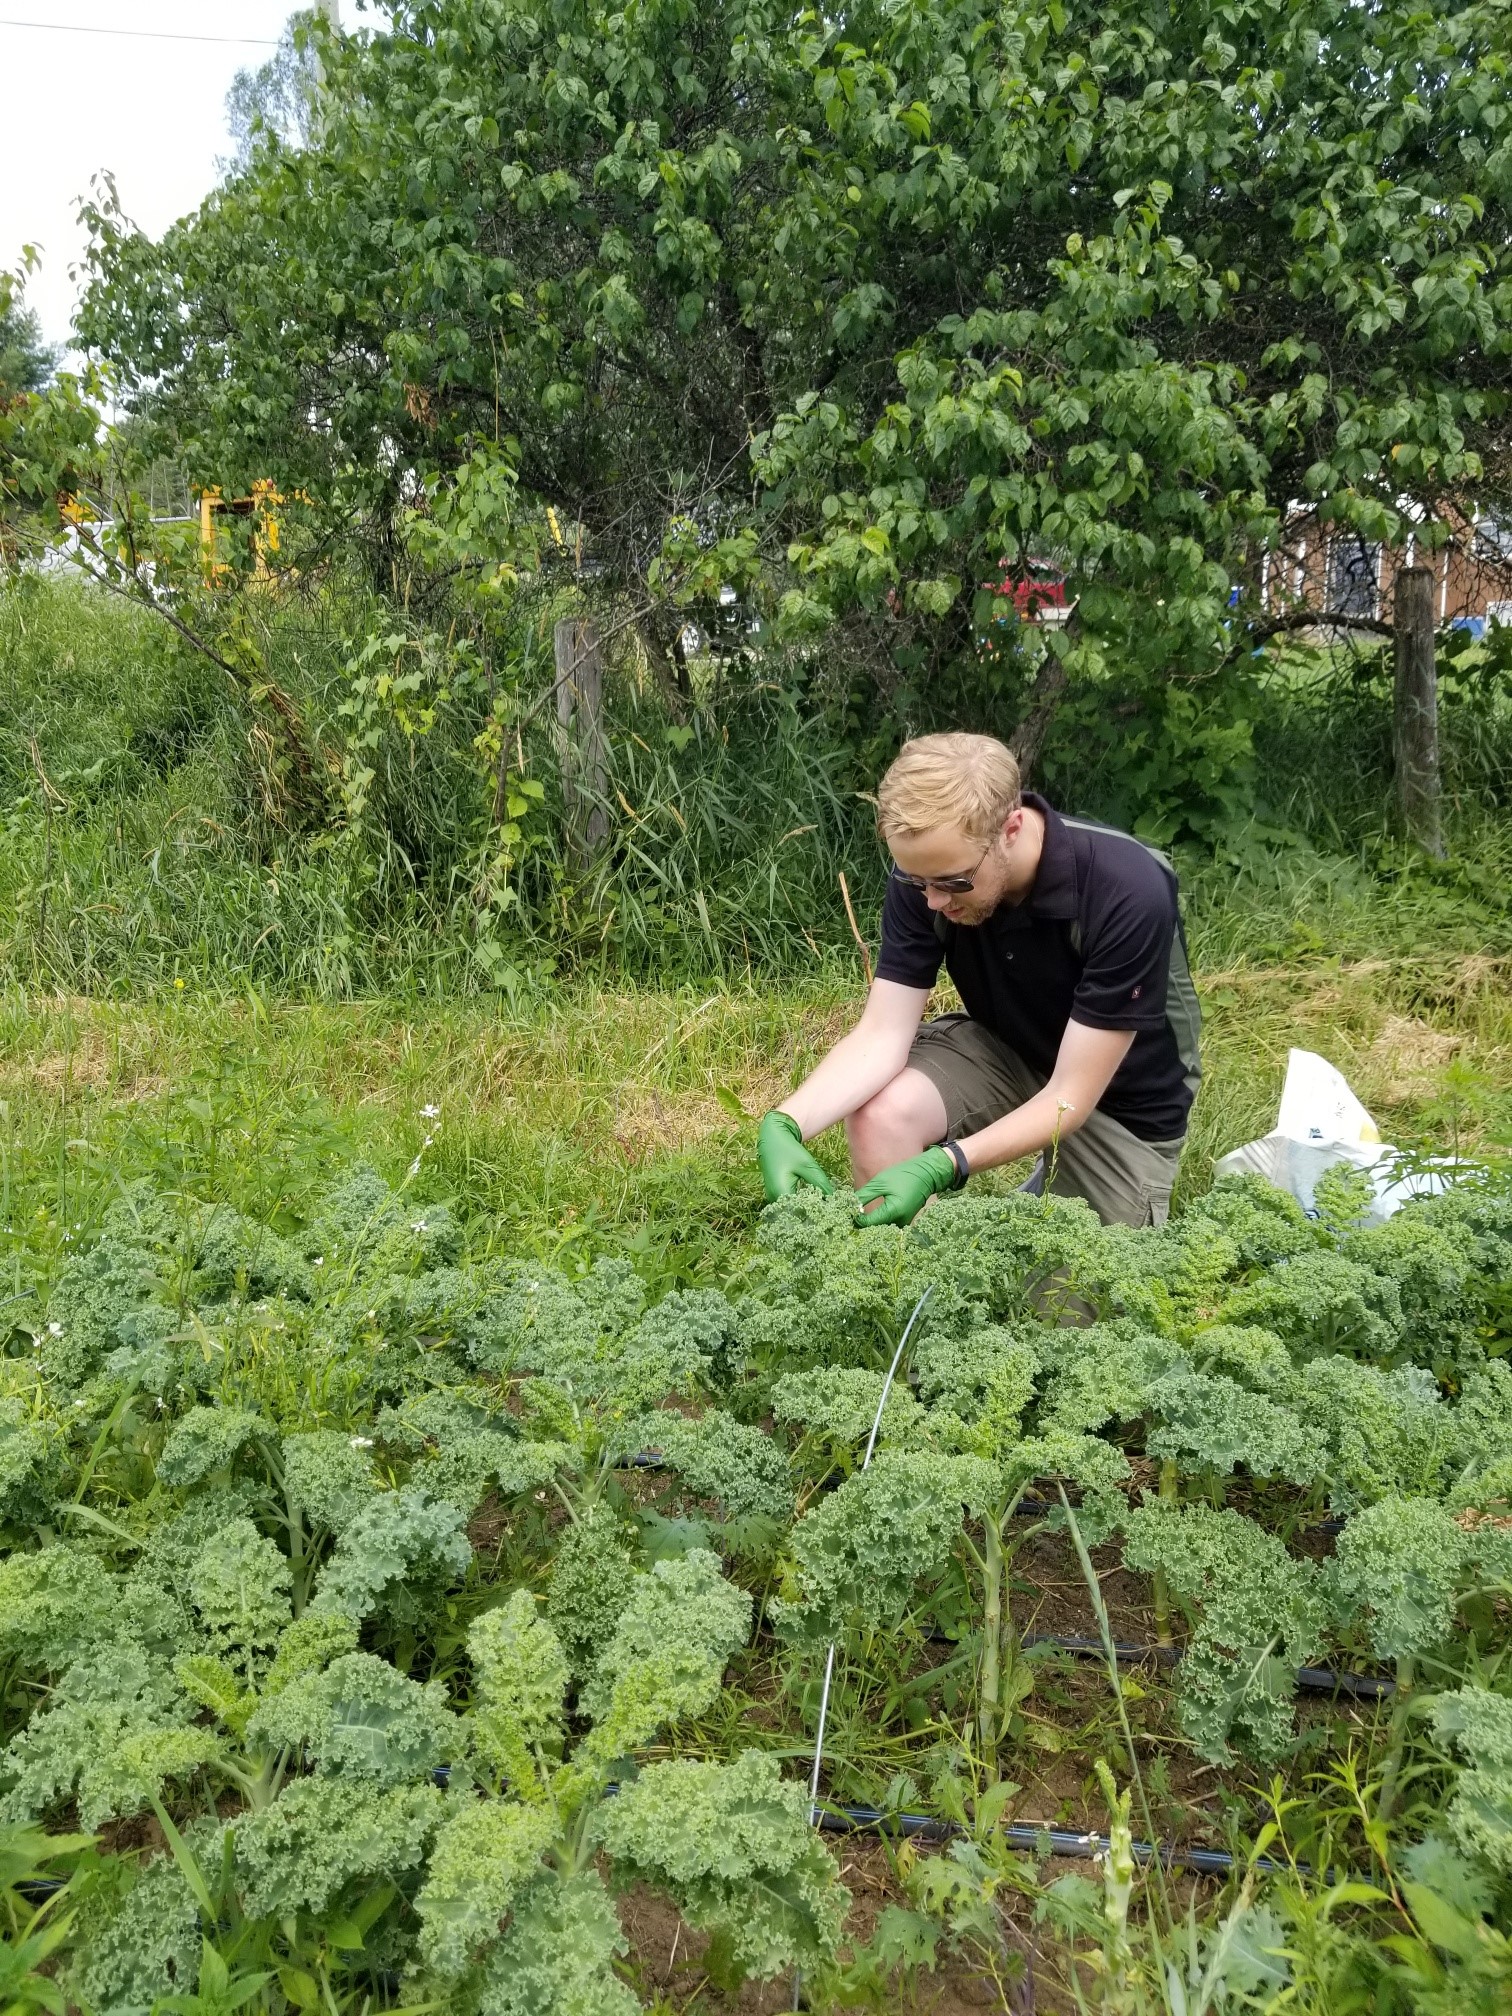 CNSC staff collecting kale near the CRL site in 2019 